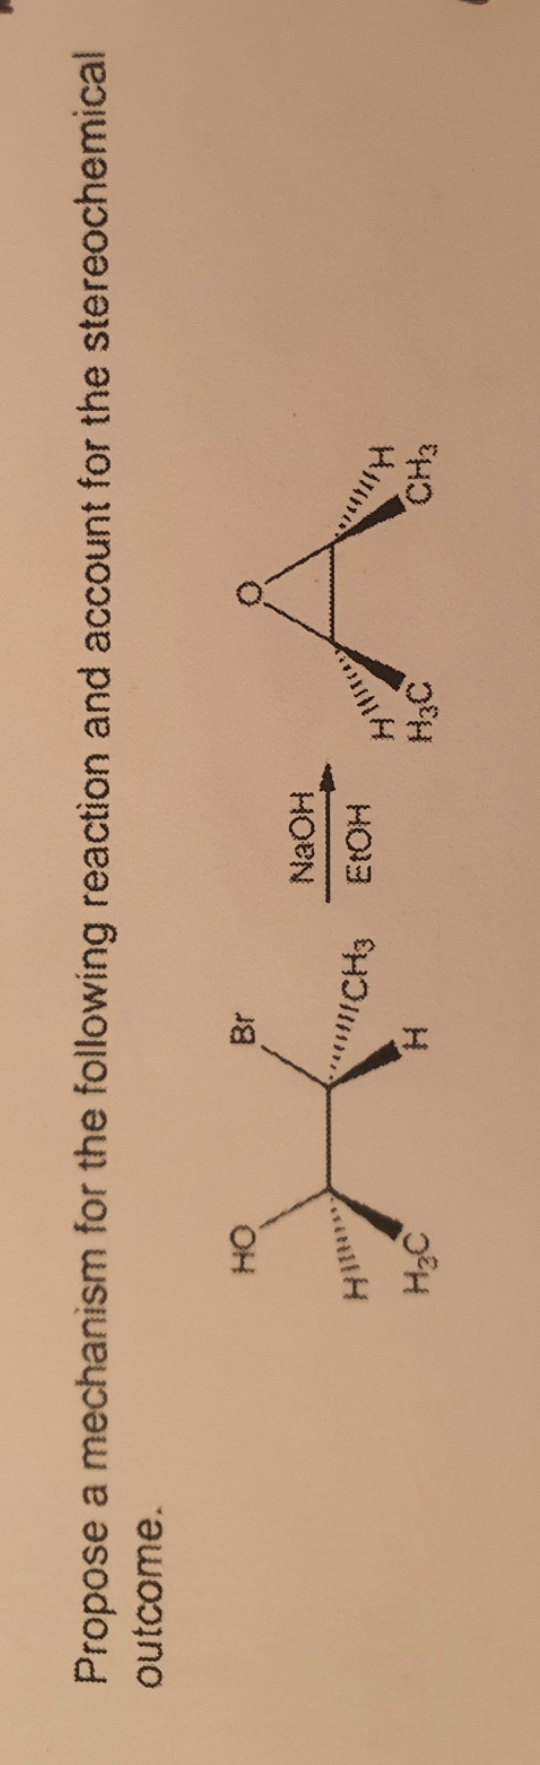 Propose a mechanism for the following reaction and account for the stereochemical
outcome.
Br
OH
NaOH
HO3
H3C
CH3
CH3
H.
